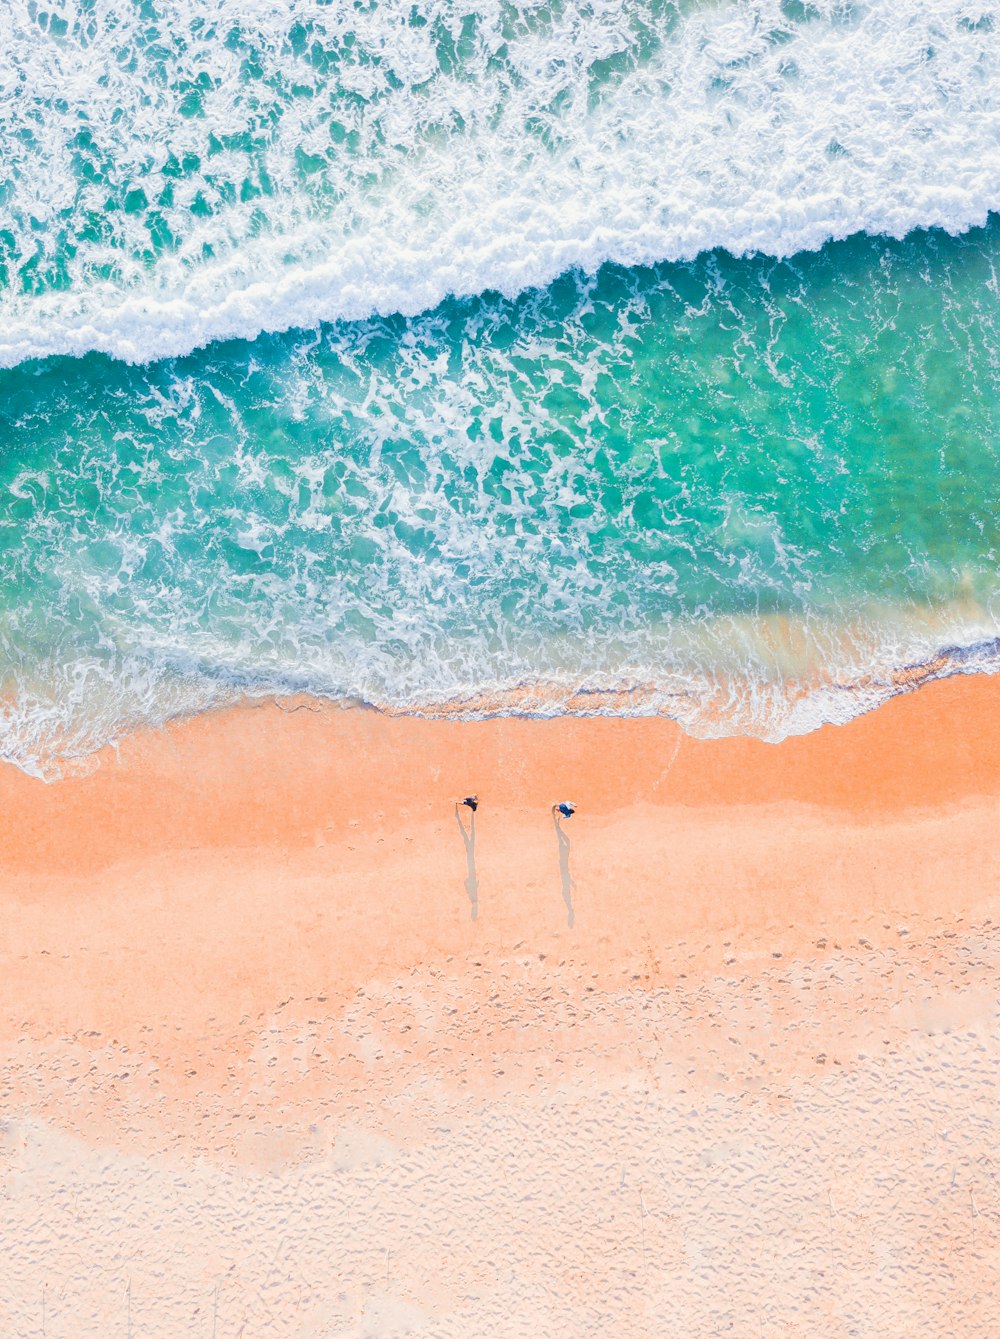 Beach Drone Pictures | Download Free Images & Stock Photos on Unsplash